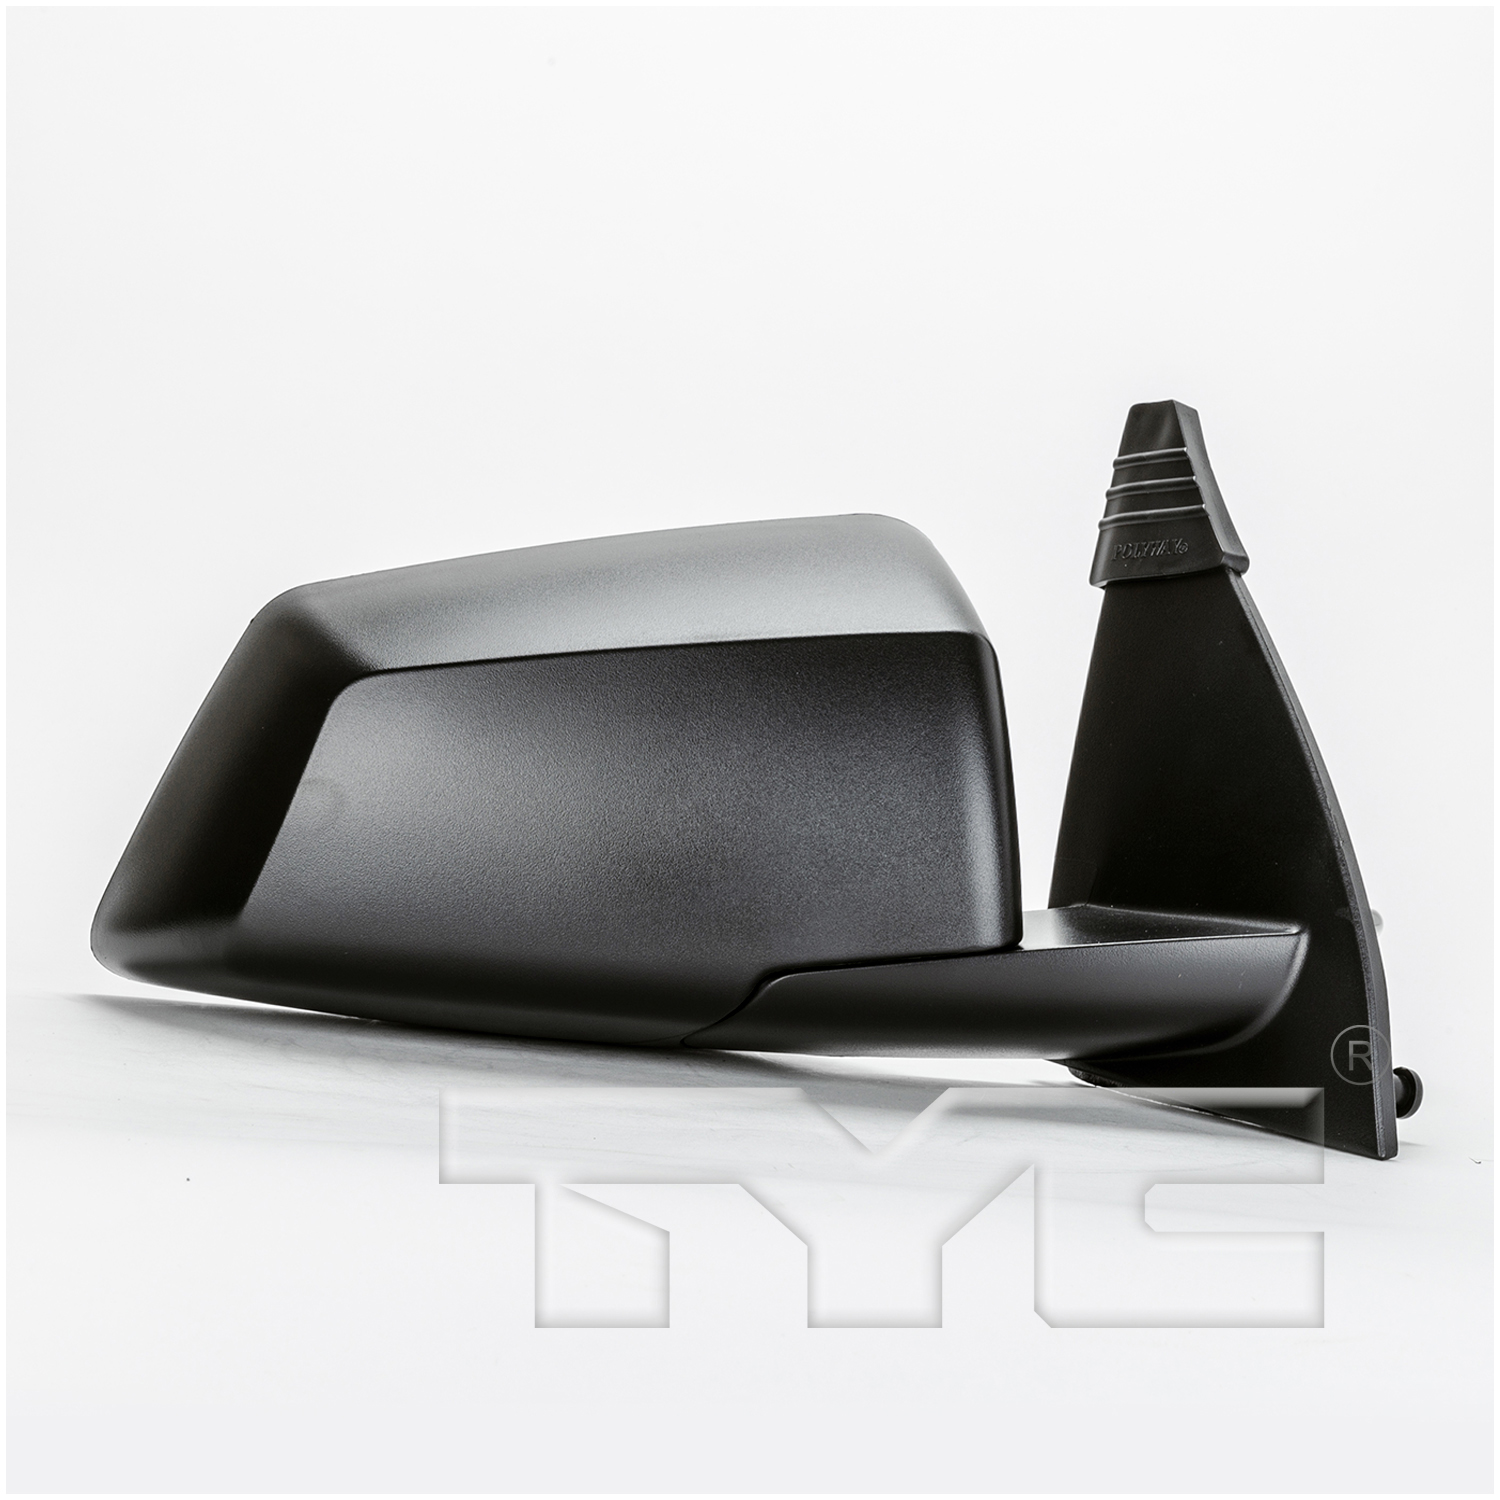 Aftermarket MIRRORS for CHEVROLET - TRAVERSE, TRAVERSE,09-17,RT Mirror outside rear view